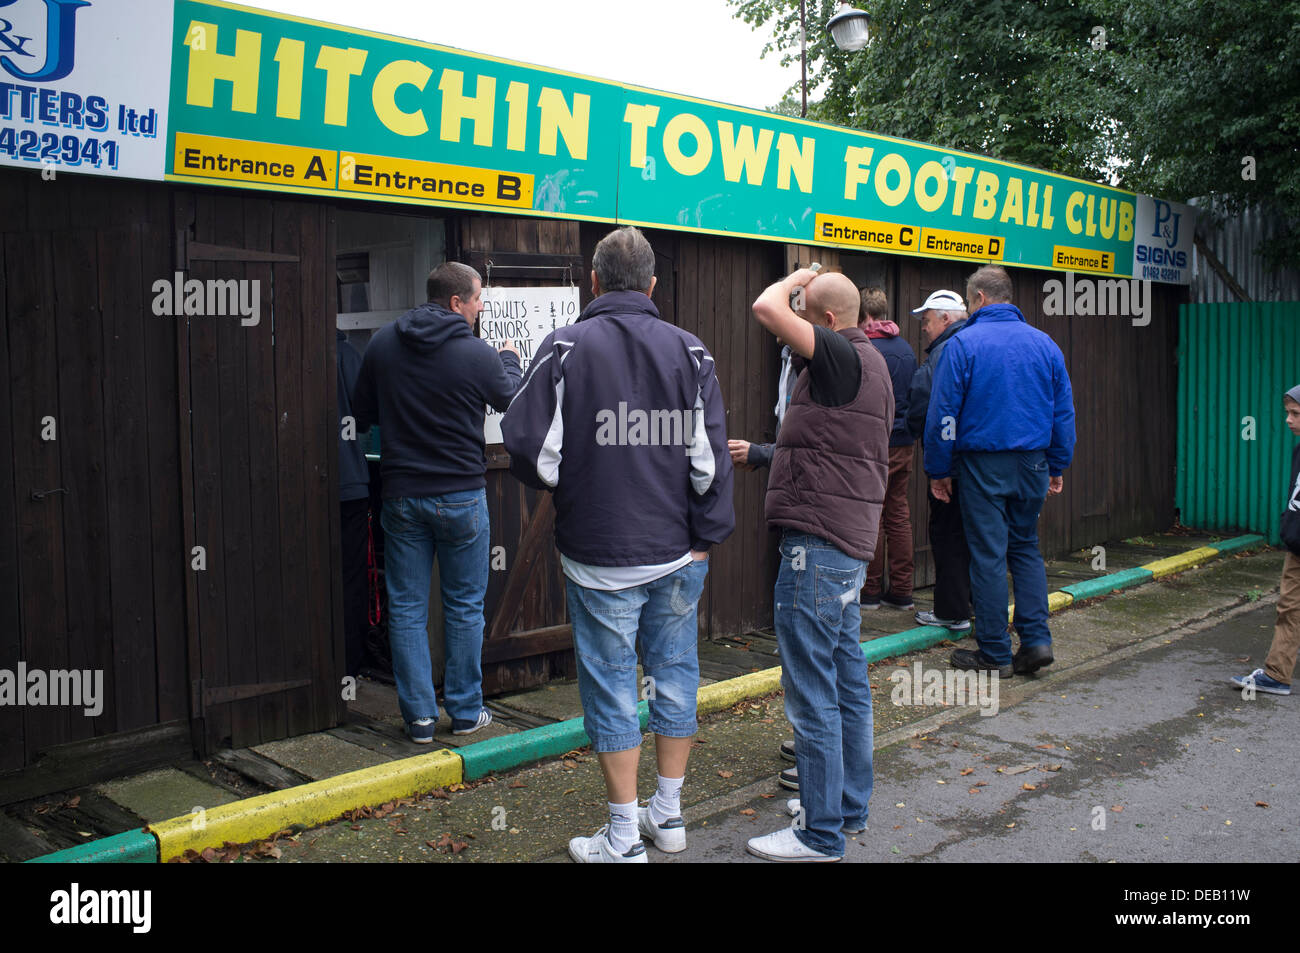 General view of spectators entering Hitchin Town FC on match day through old fashioned turnstiles. Stock Photo